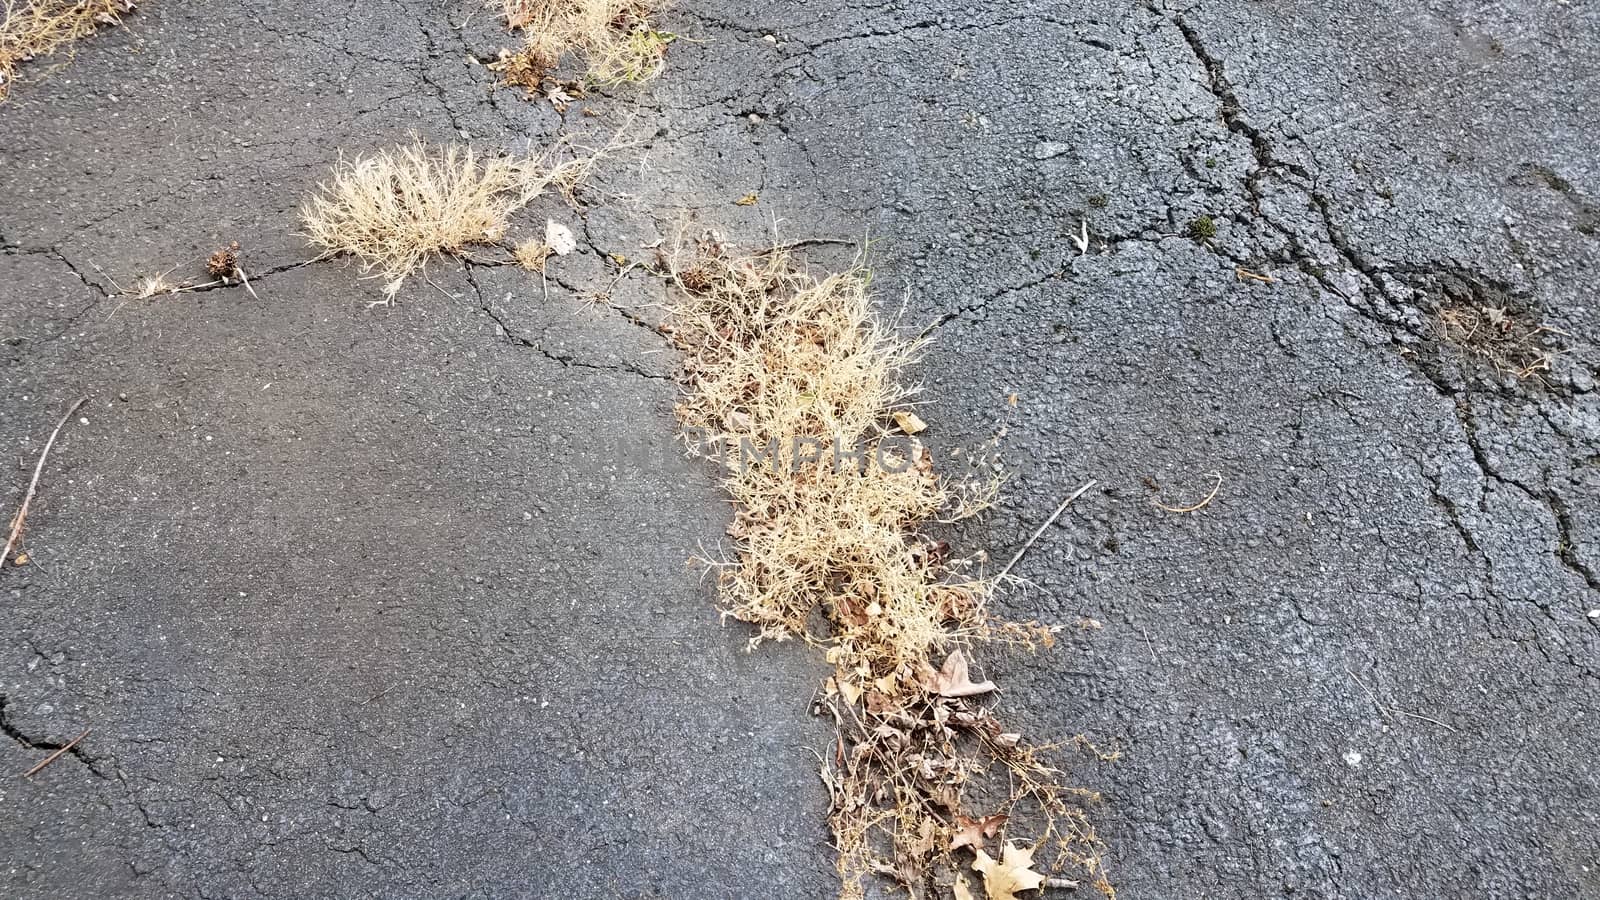 brown dead weeds and grass in cracks in asphalt or pavement